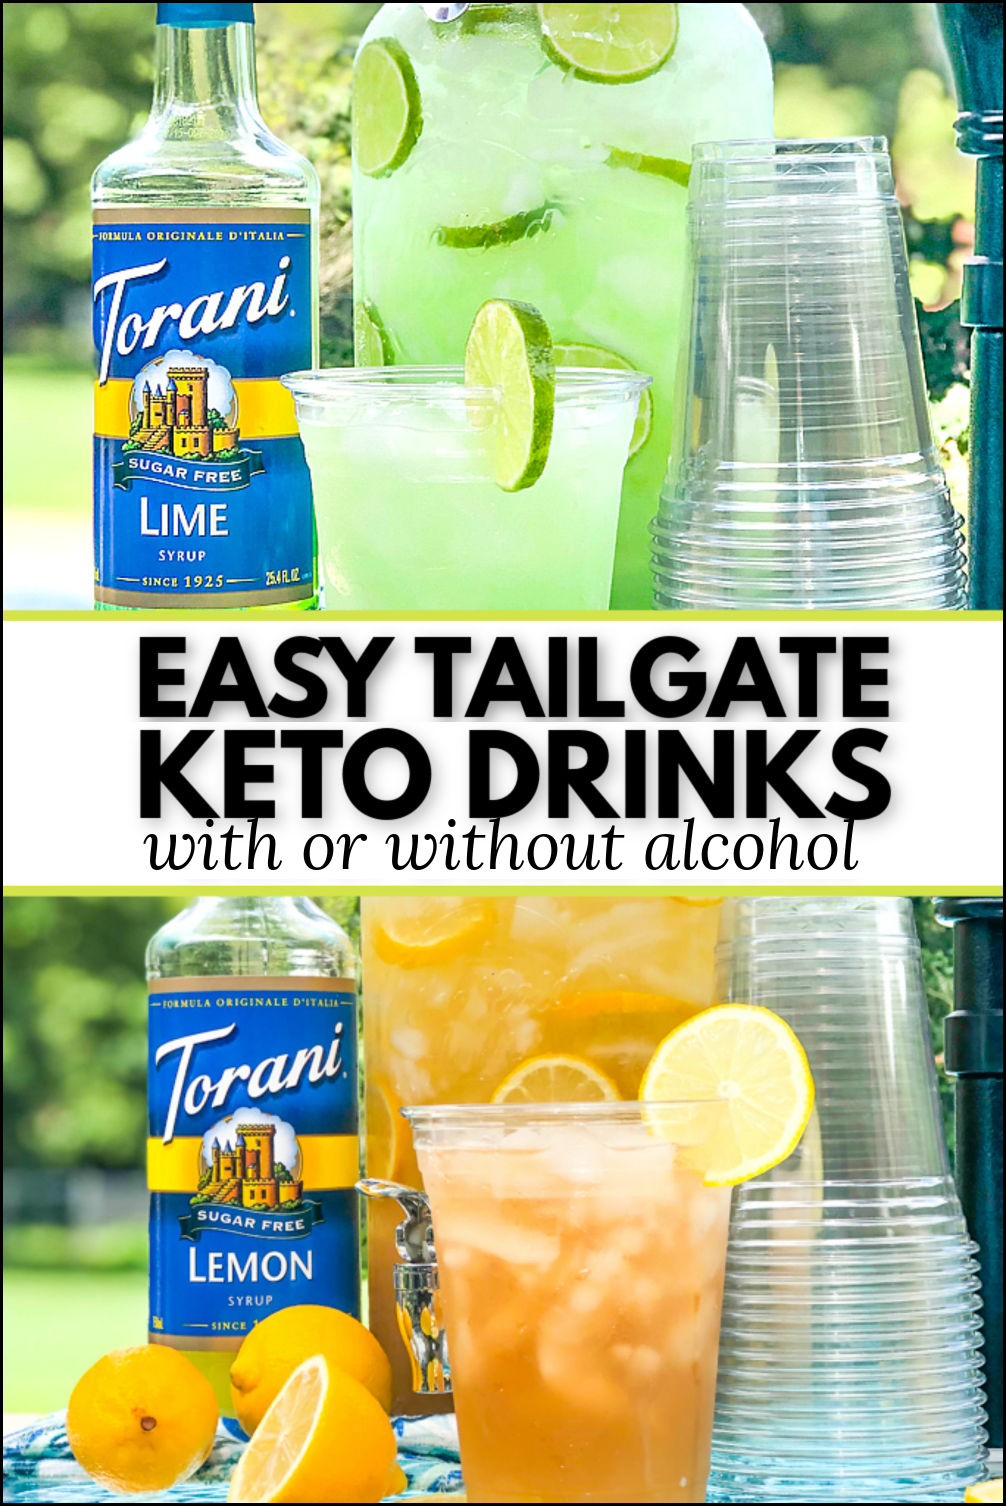 2 large drink dispensers with keto tailgate drinks with text